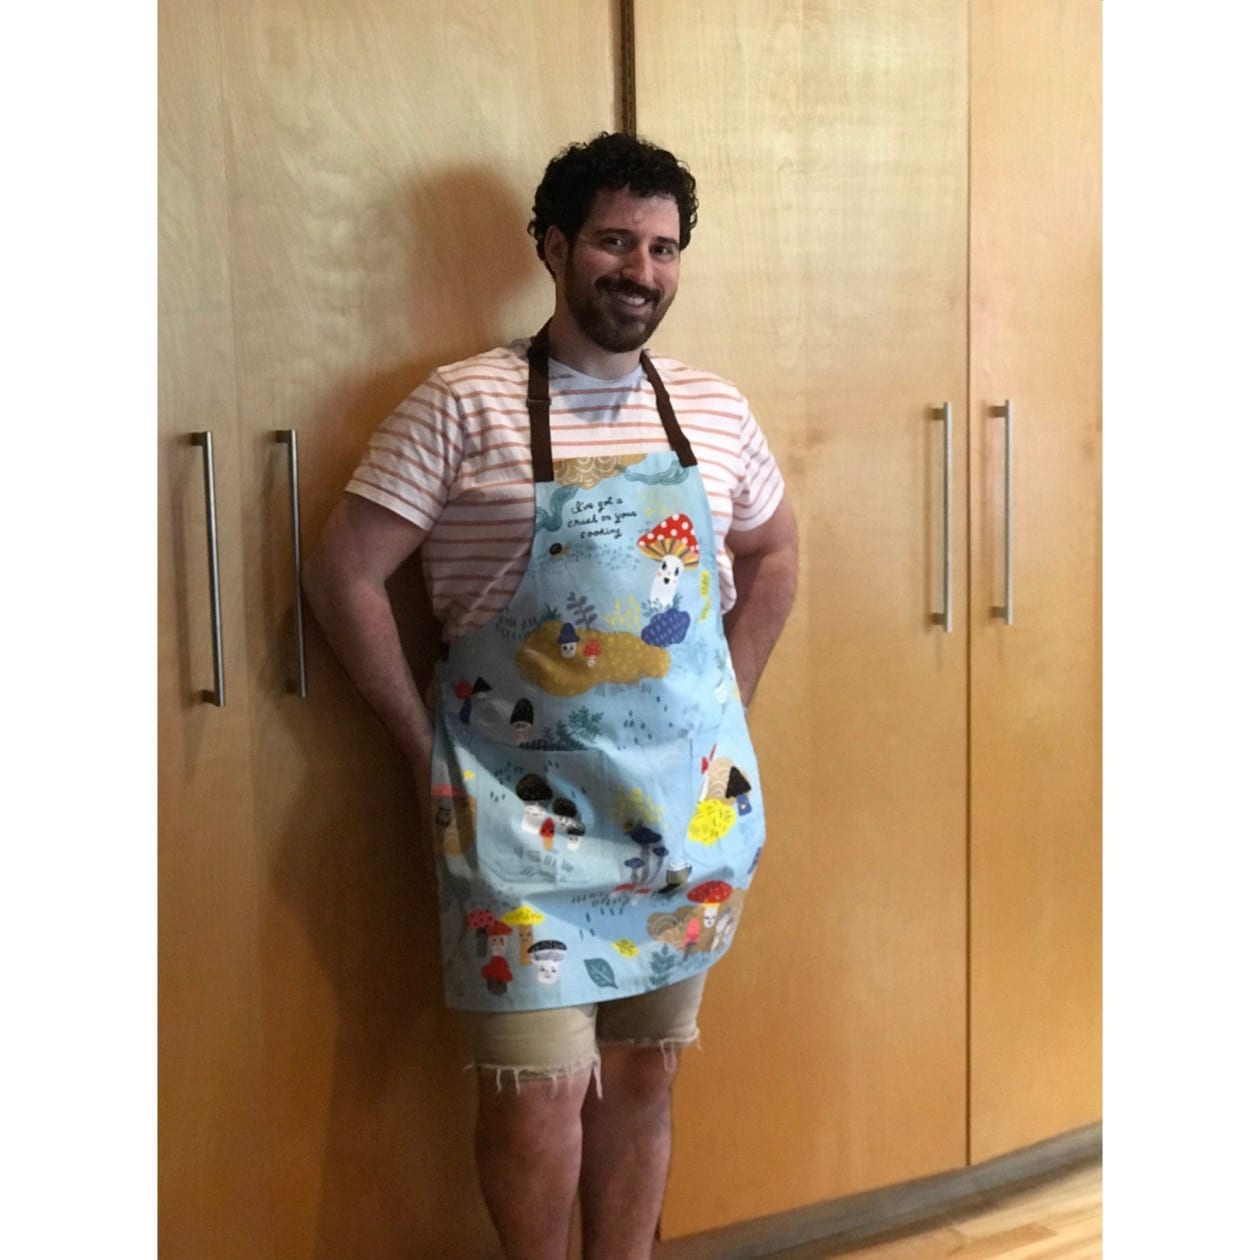 I've Got A Crush On Your Cooking Funny BlueQ Cooking and BBQ Apron Cute Mushroom and Toadstool Motif Unisex 2 Pockets Adjustable Strap 100% Cotton